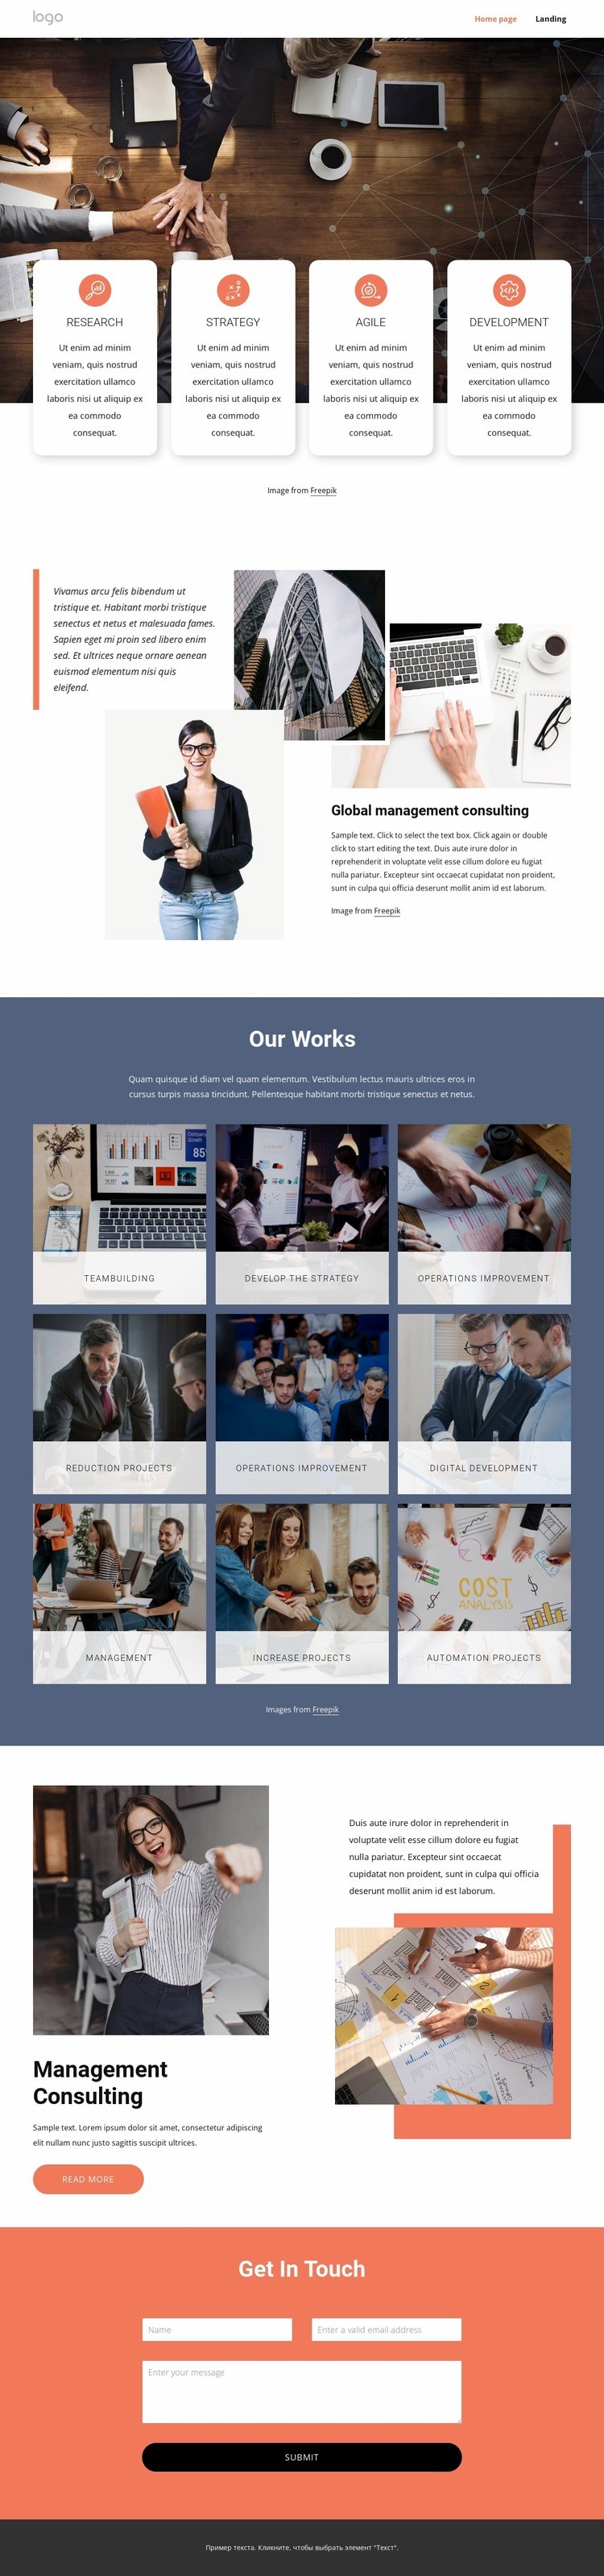 The leading consulting firms for management services Webflow Template Alternative